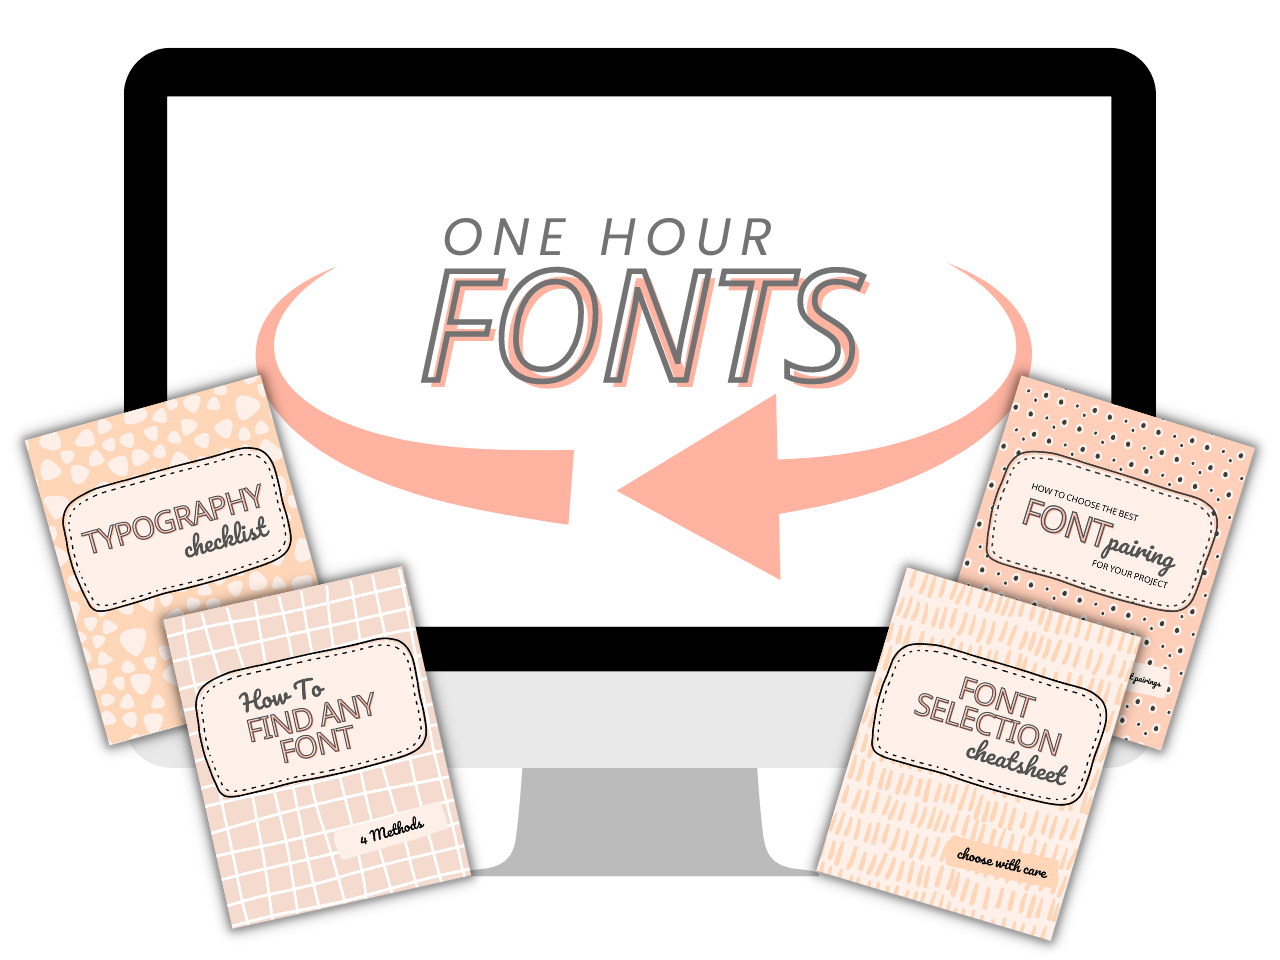 one hour fonts course